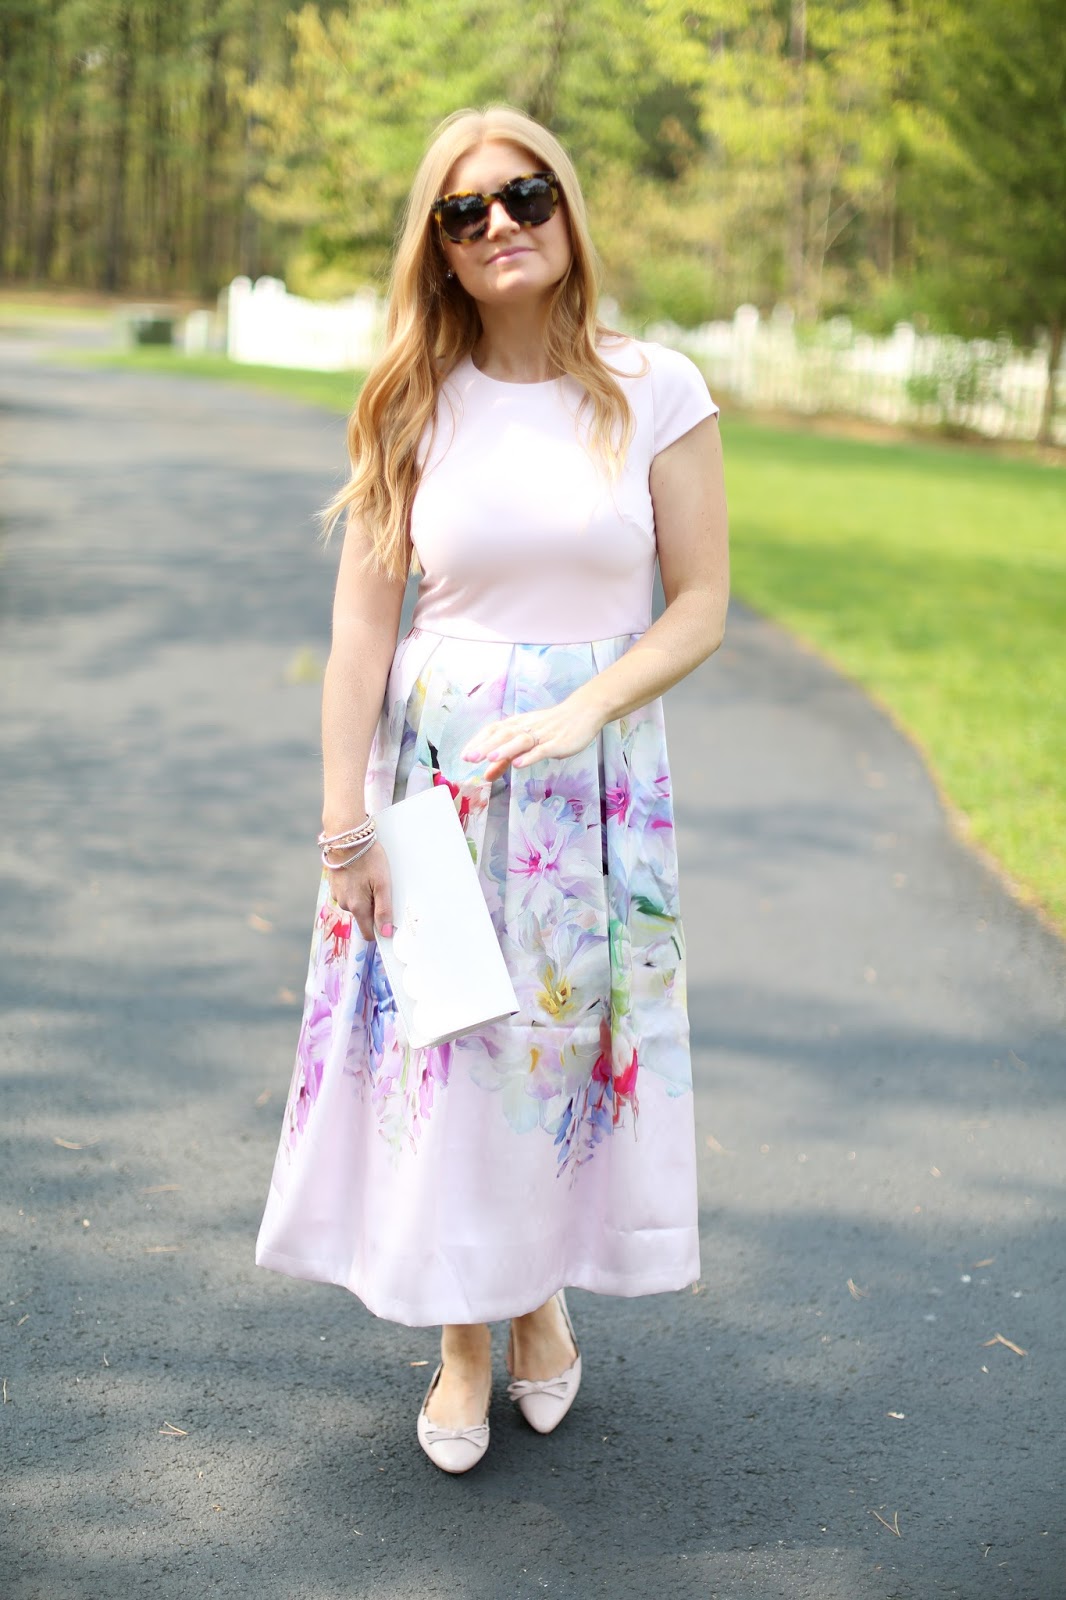 Shopping Bags and Travel Bags: Ted Baker Dress